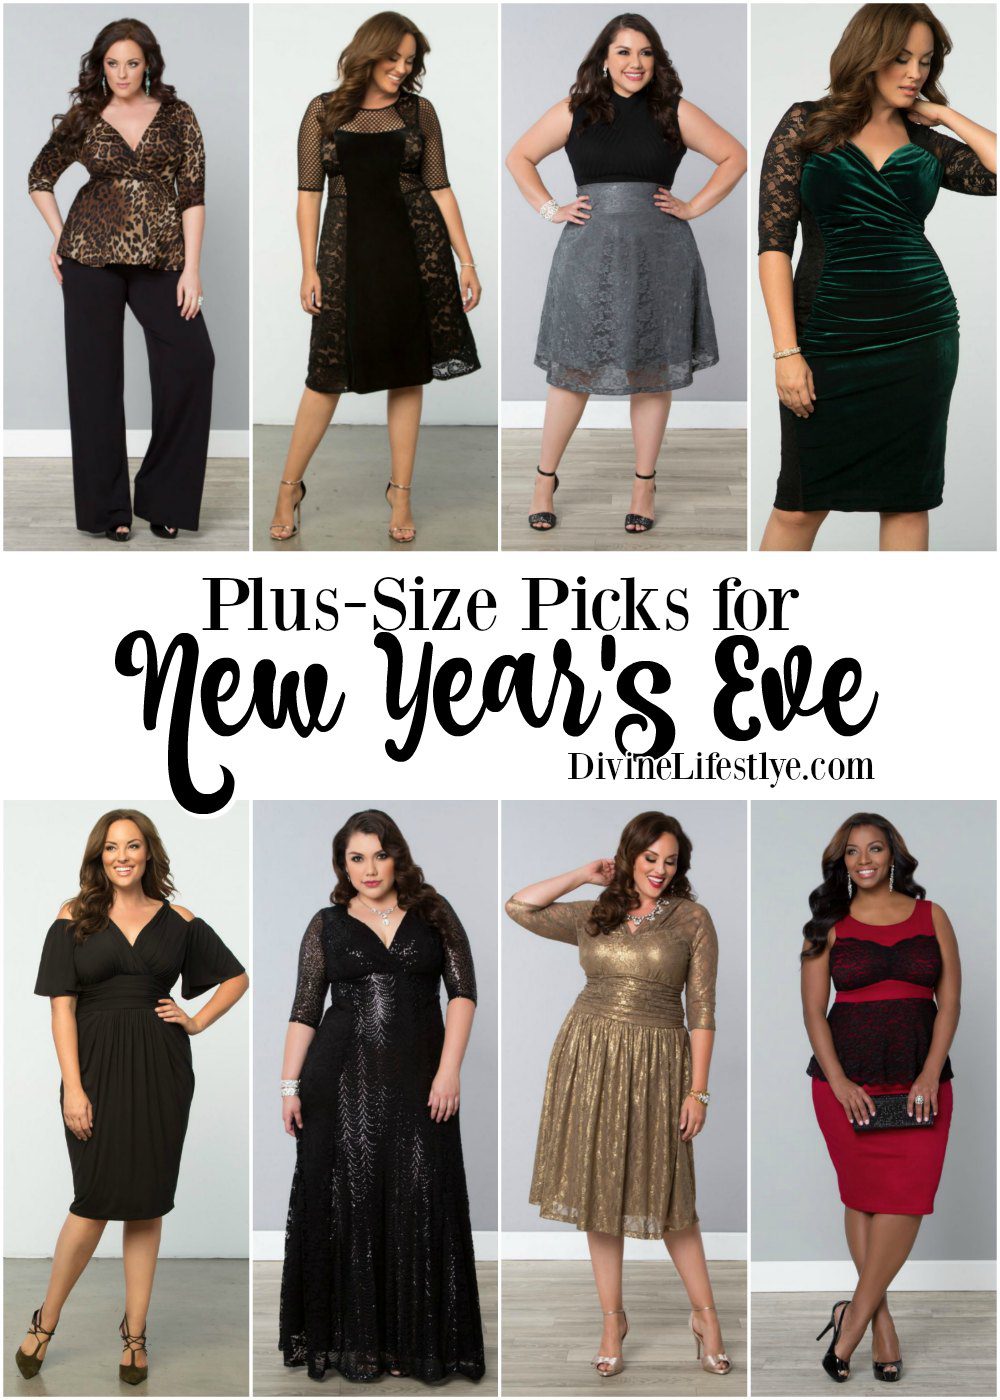 Perfect Plus-Size Outfits for New Year's Eve